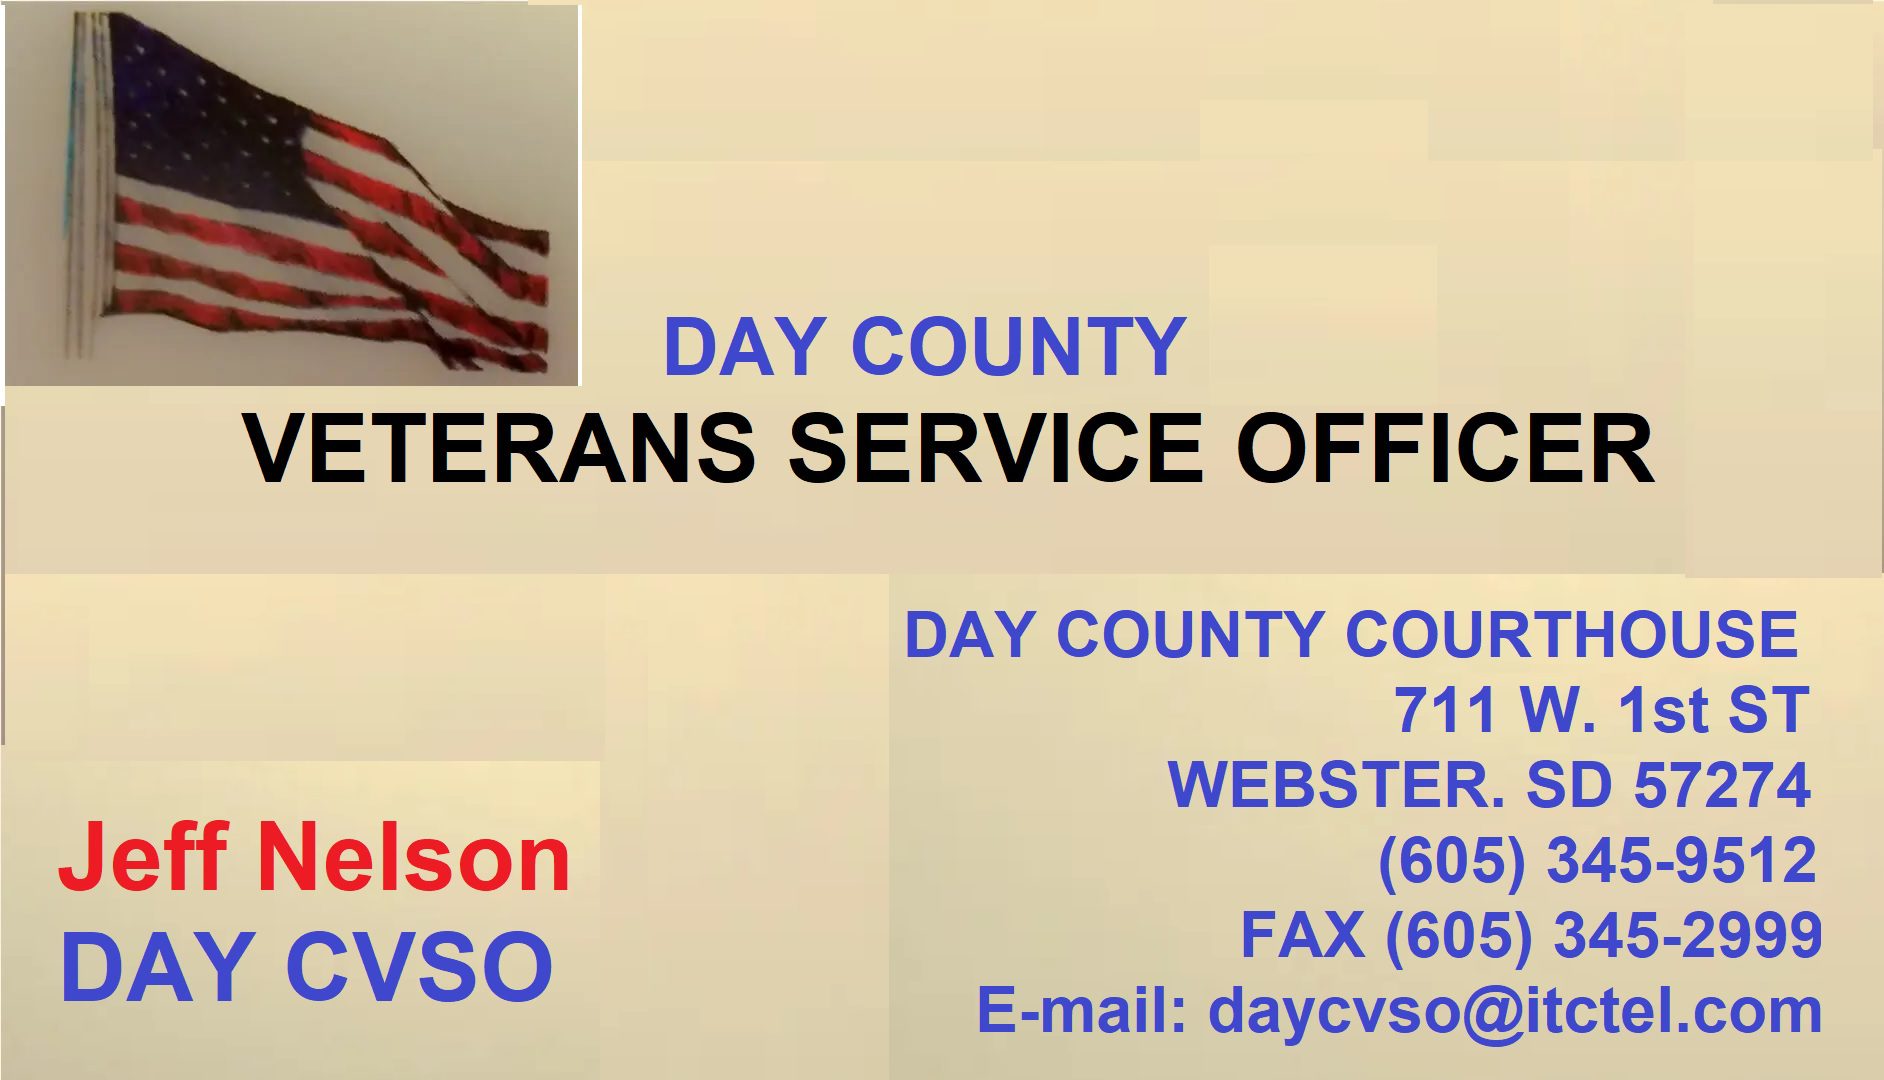 A business card for the veterans service office.